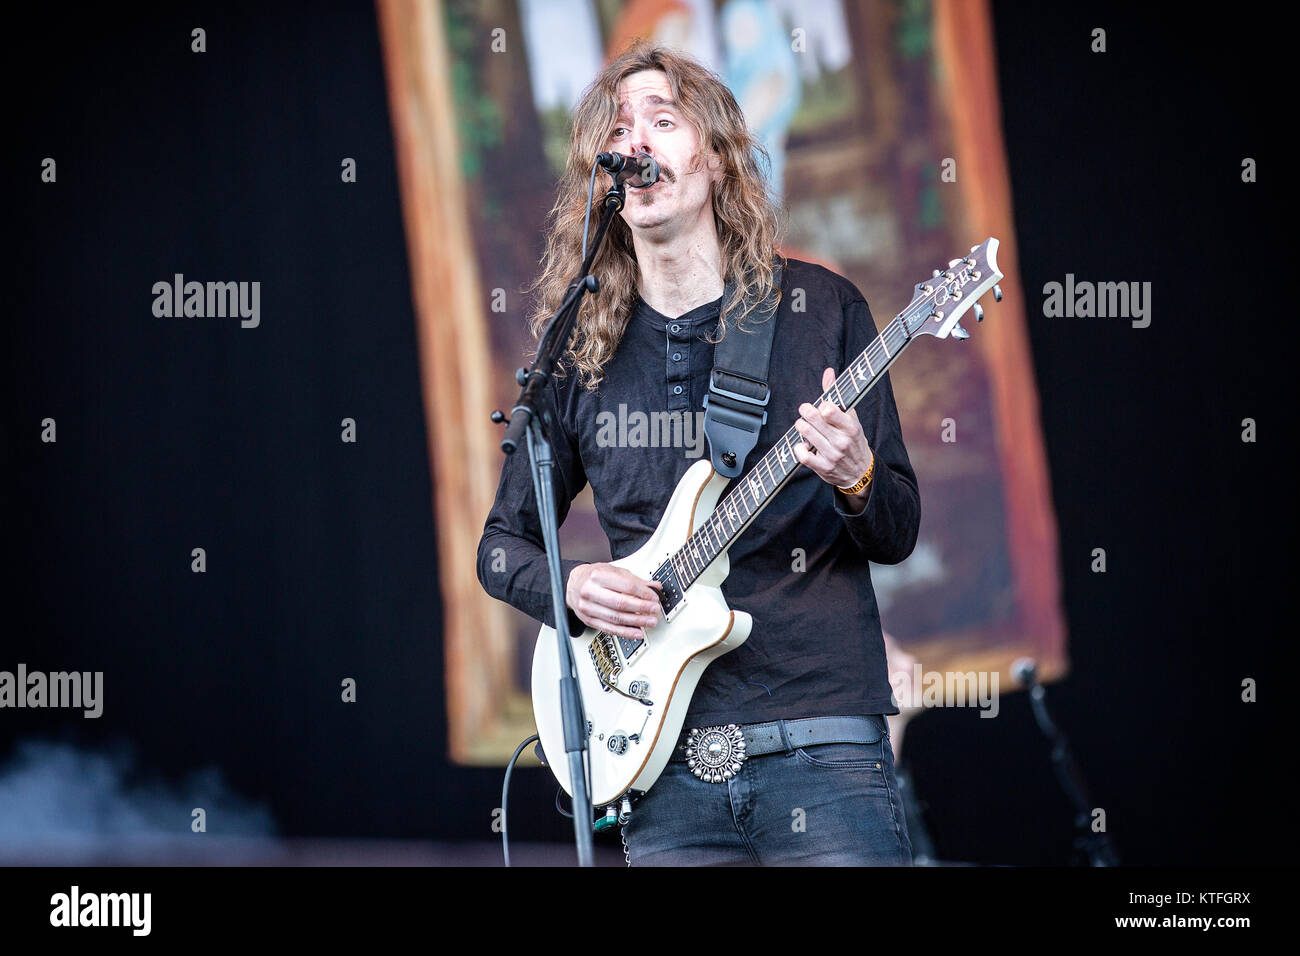 Opeth, the American heavy band, performs a live concert at the Swedish music festival Sweden Rock Festival 2015. Here vocalist and guitarist Mikael Åkerfeldt is seen live on stage. Sweden, 05/06 2015. Stock Photo